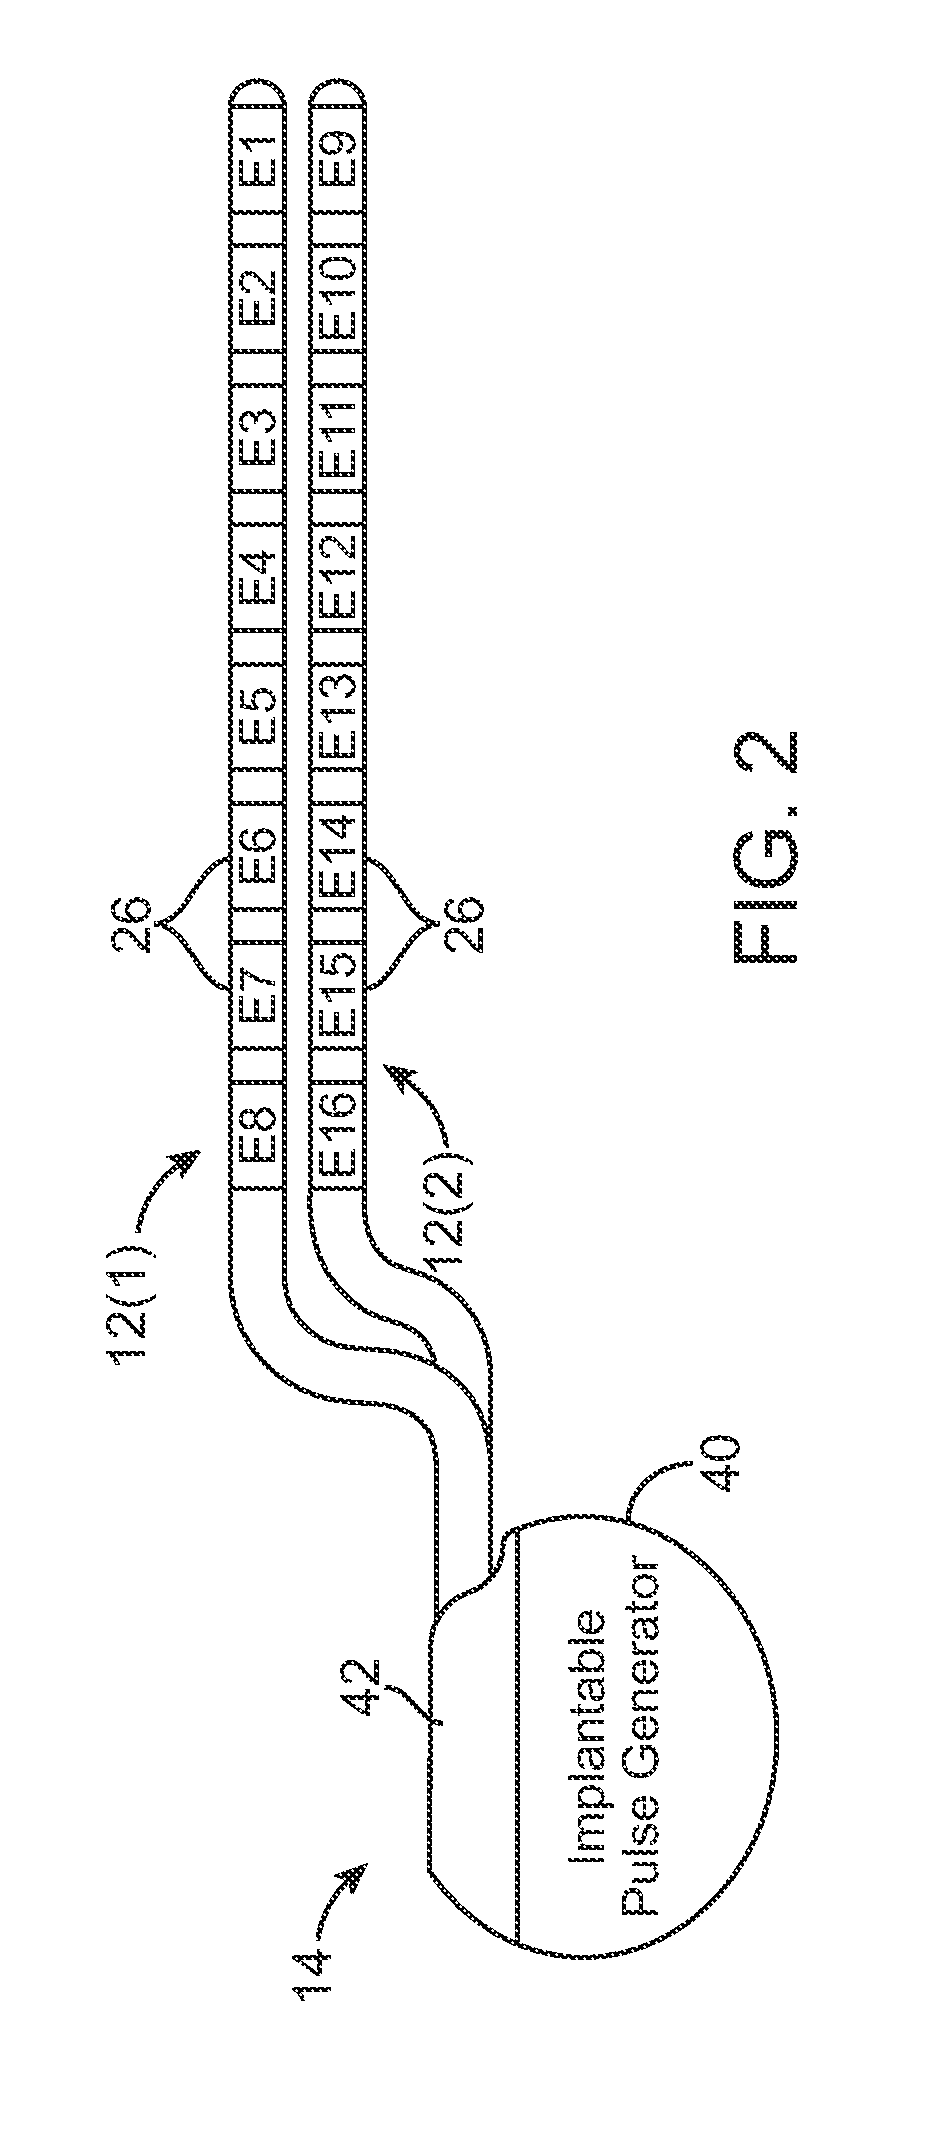 System and method for modulating action potential propagation during spinal cord stimulation